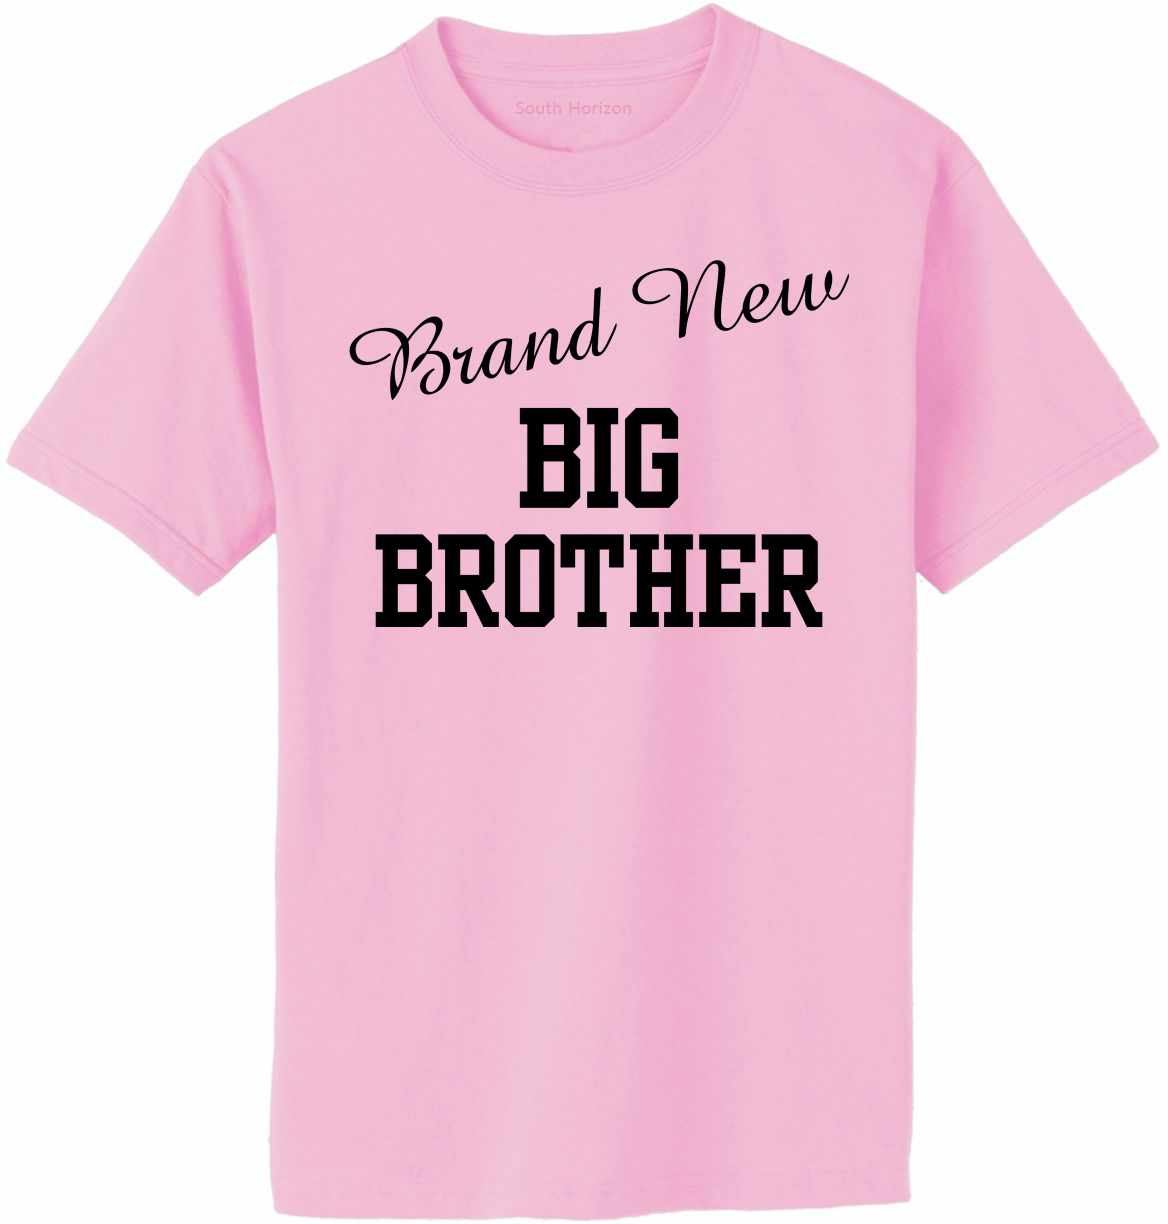 Brand New Big Brother Adult T-Shirt (#999-1)